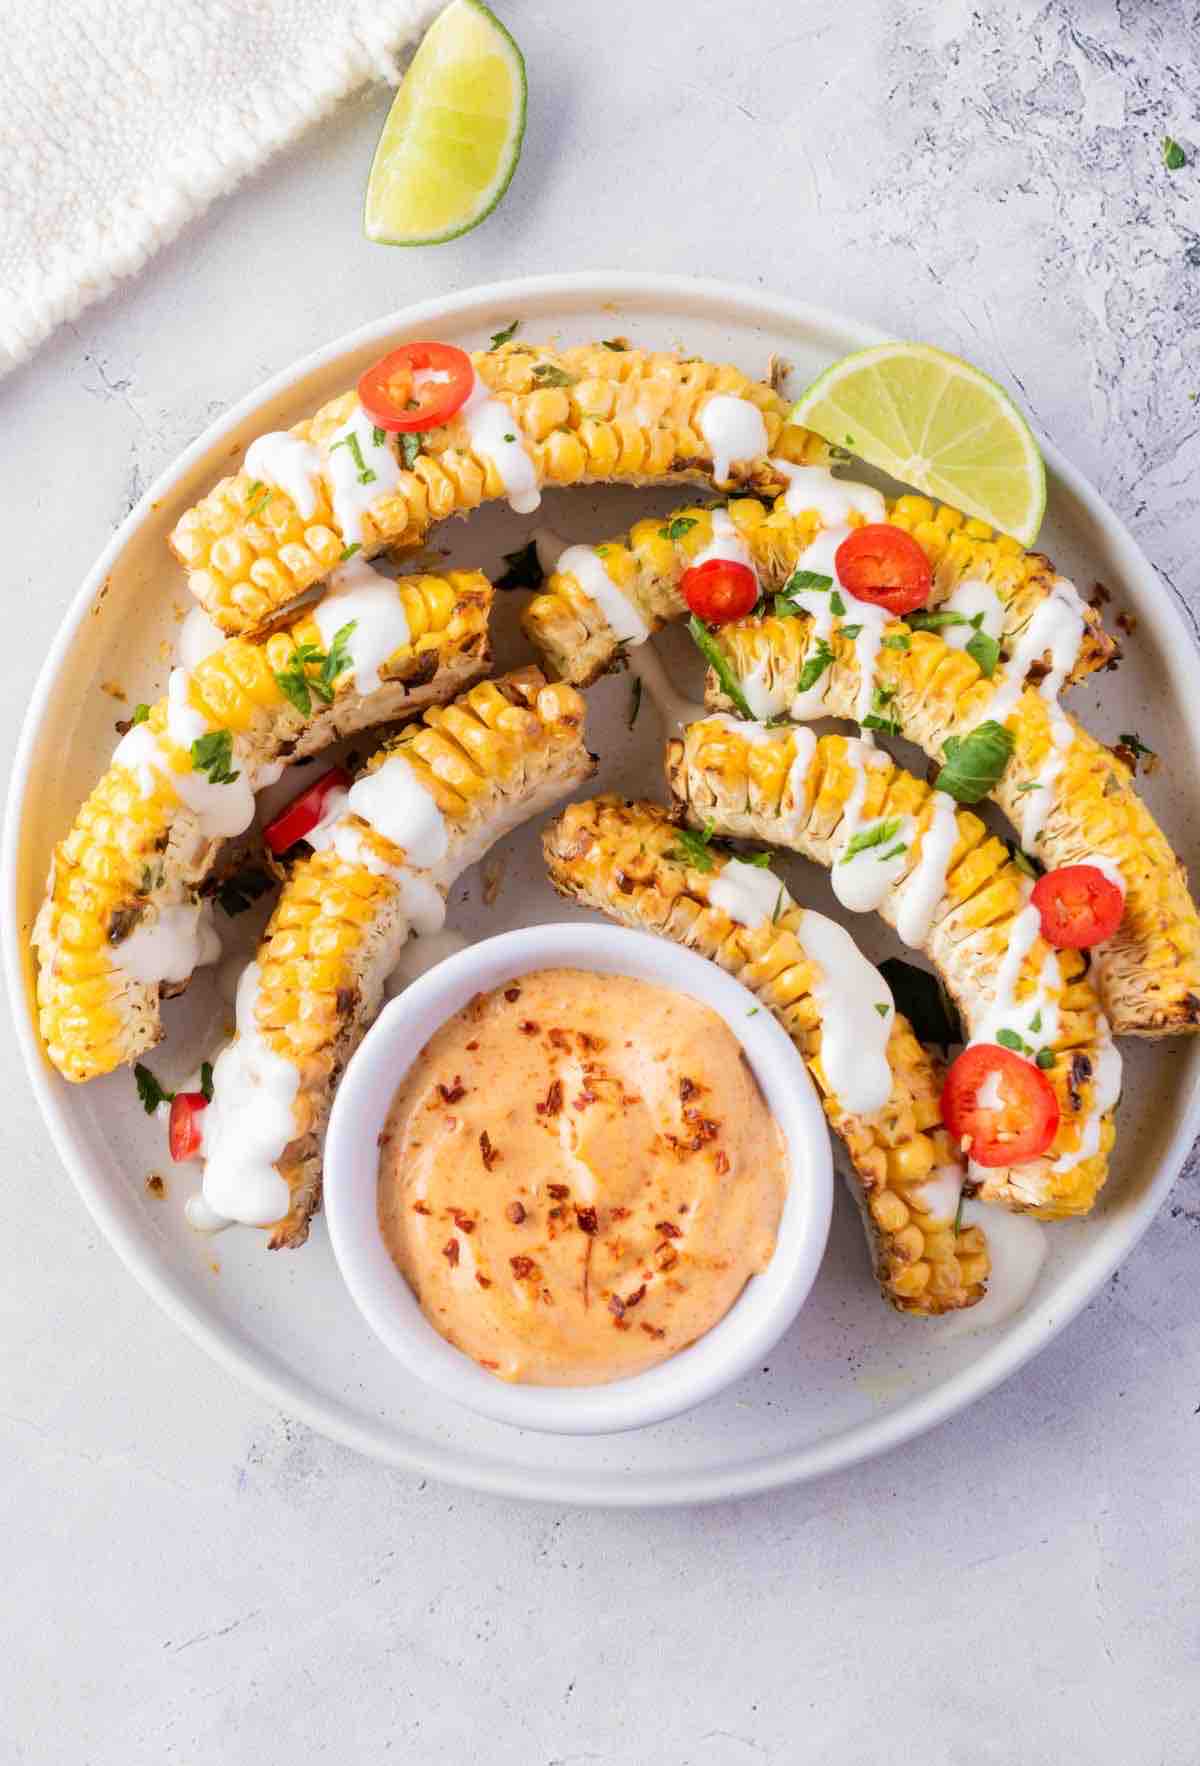 corn sliced and put on a plate with cream and sauce.